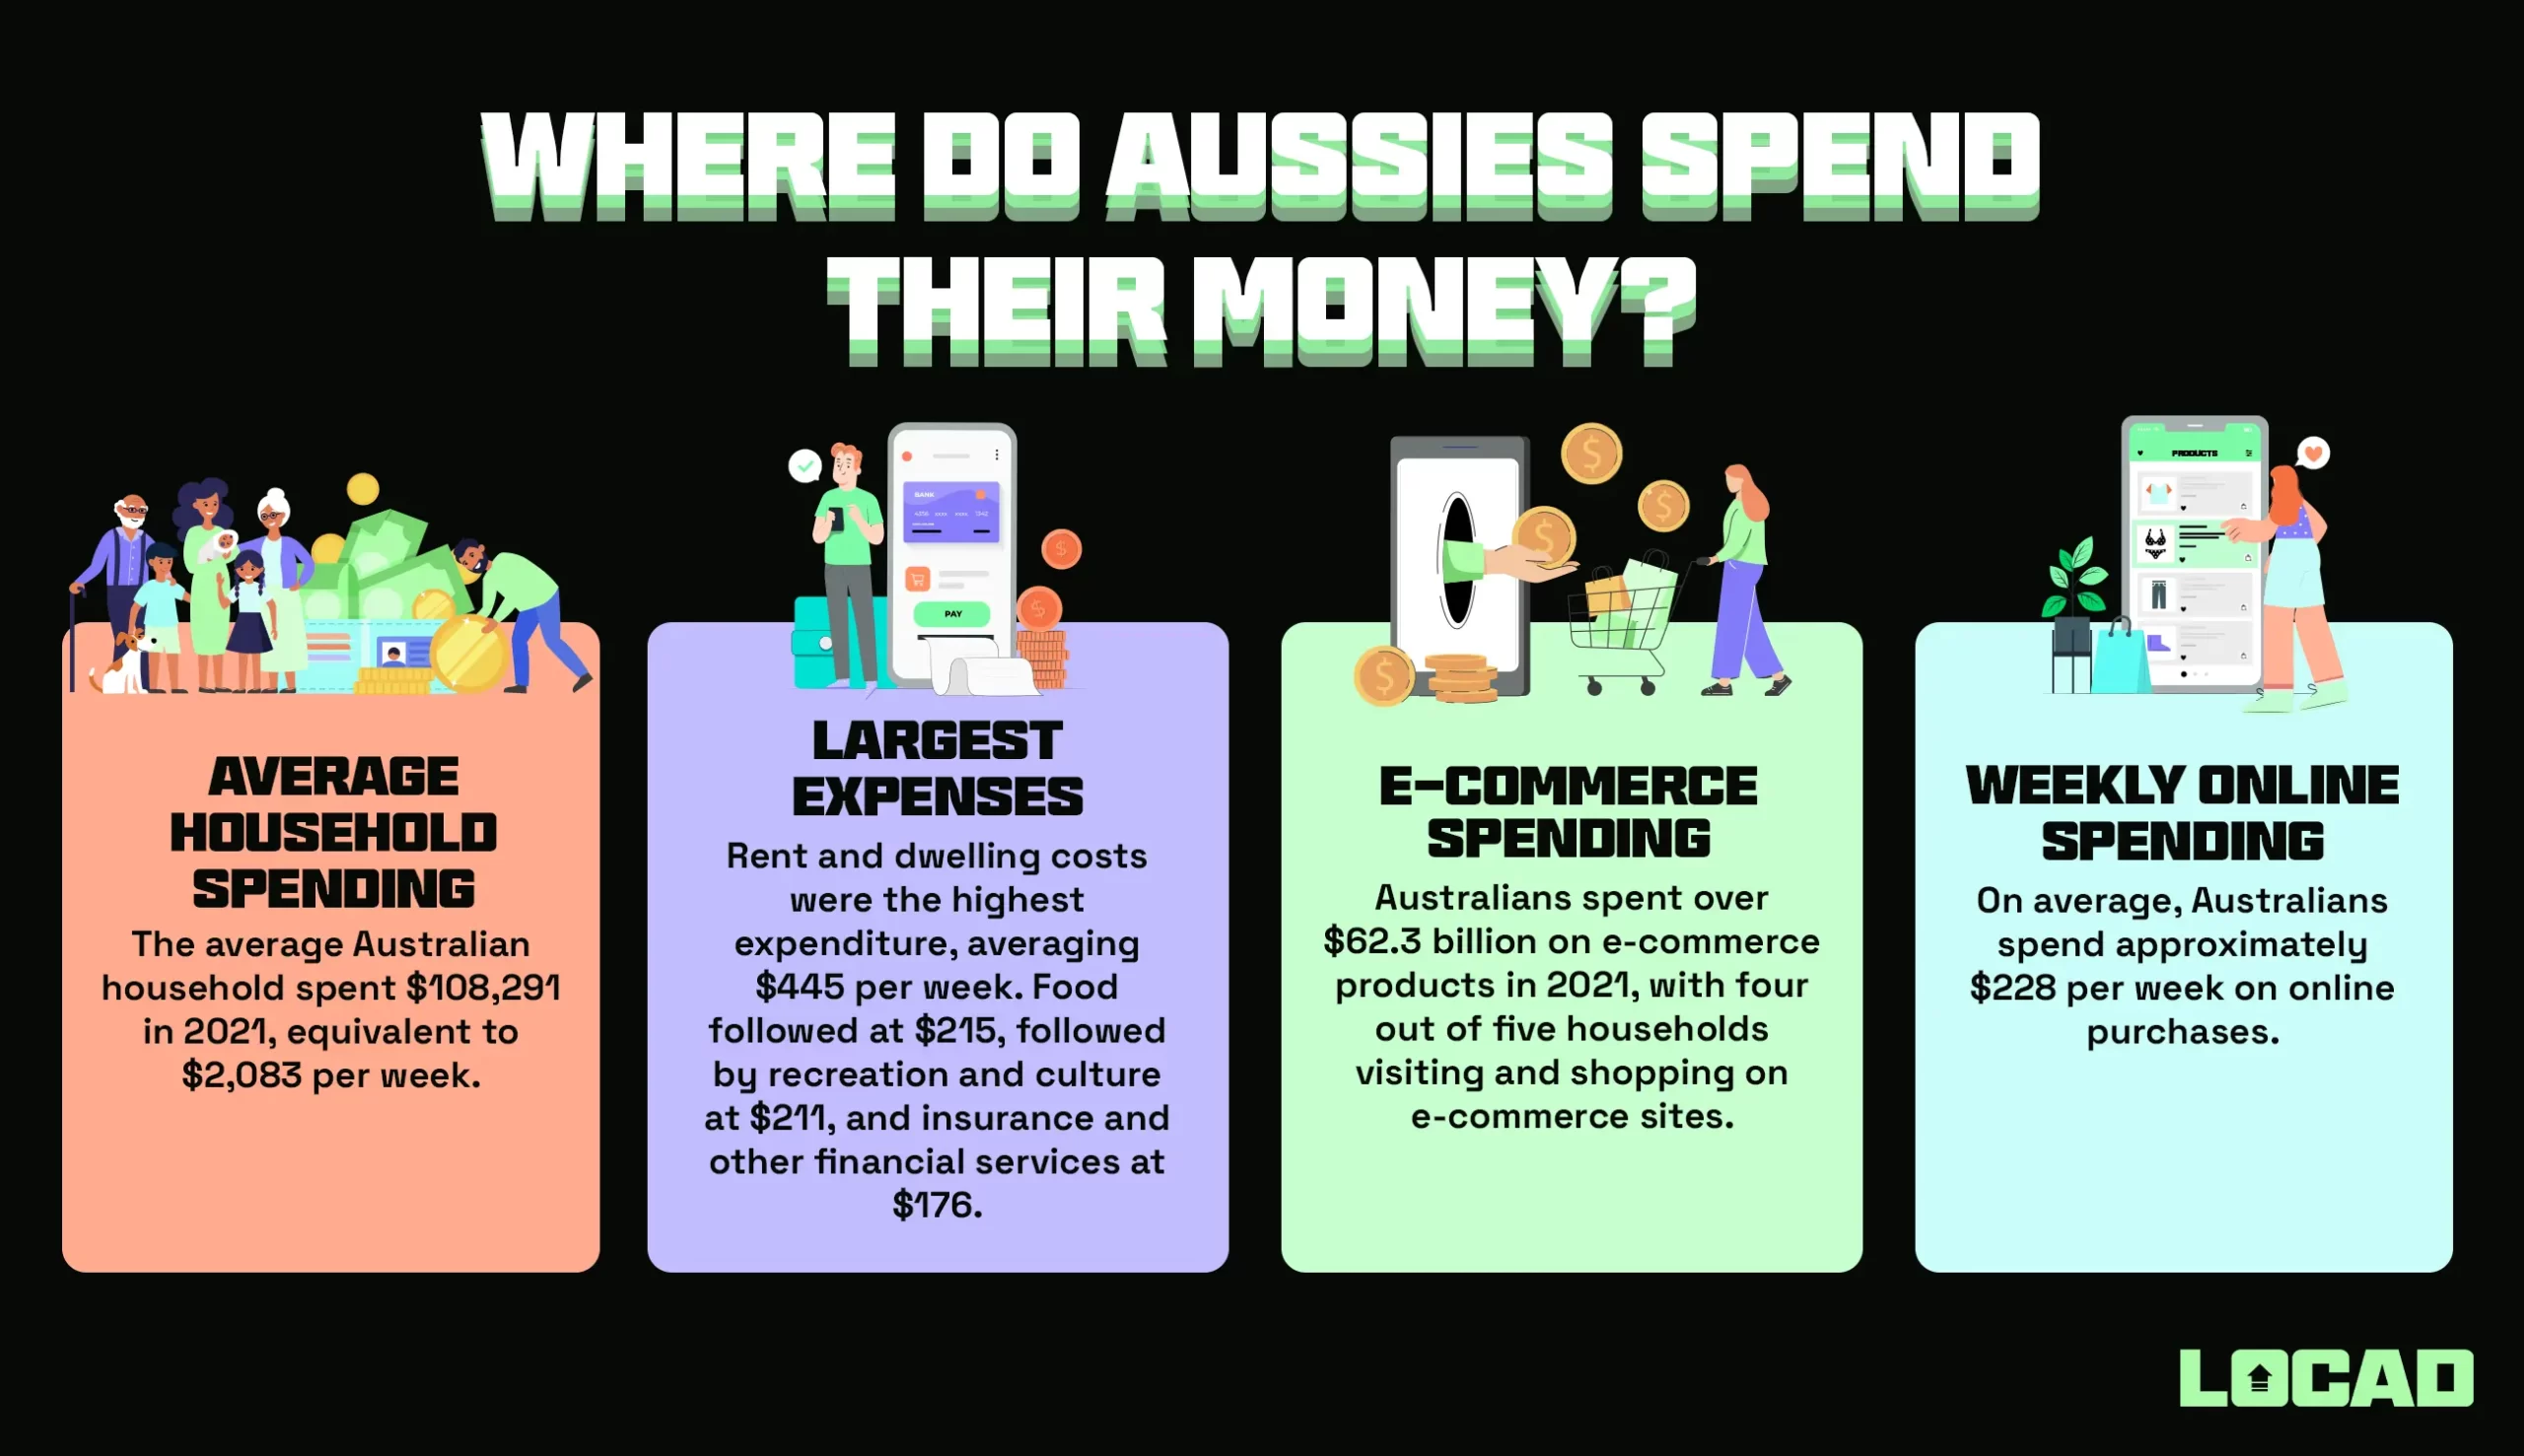 Localising for Australian Consumers: Cultural Considerations for E-commerce Businesses